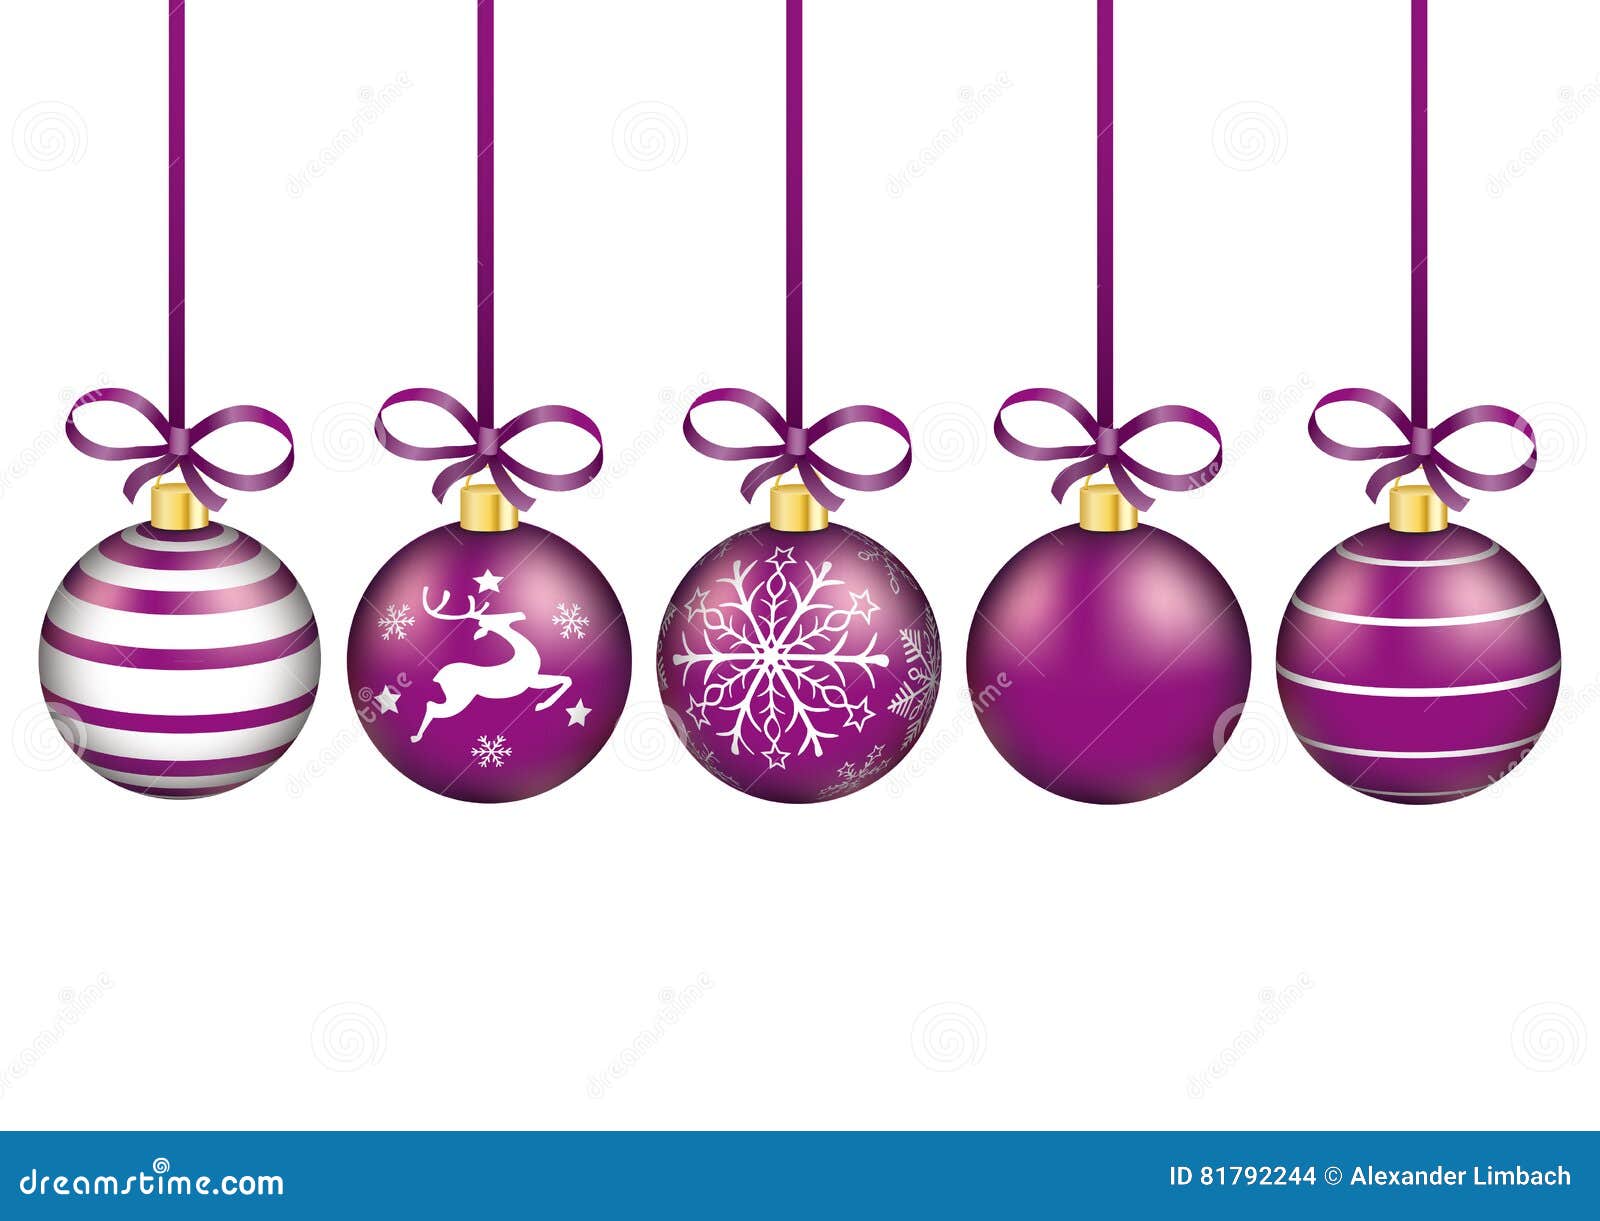 5 purple christmas baubles red ribbons